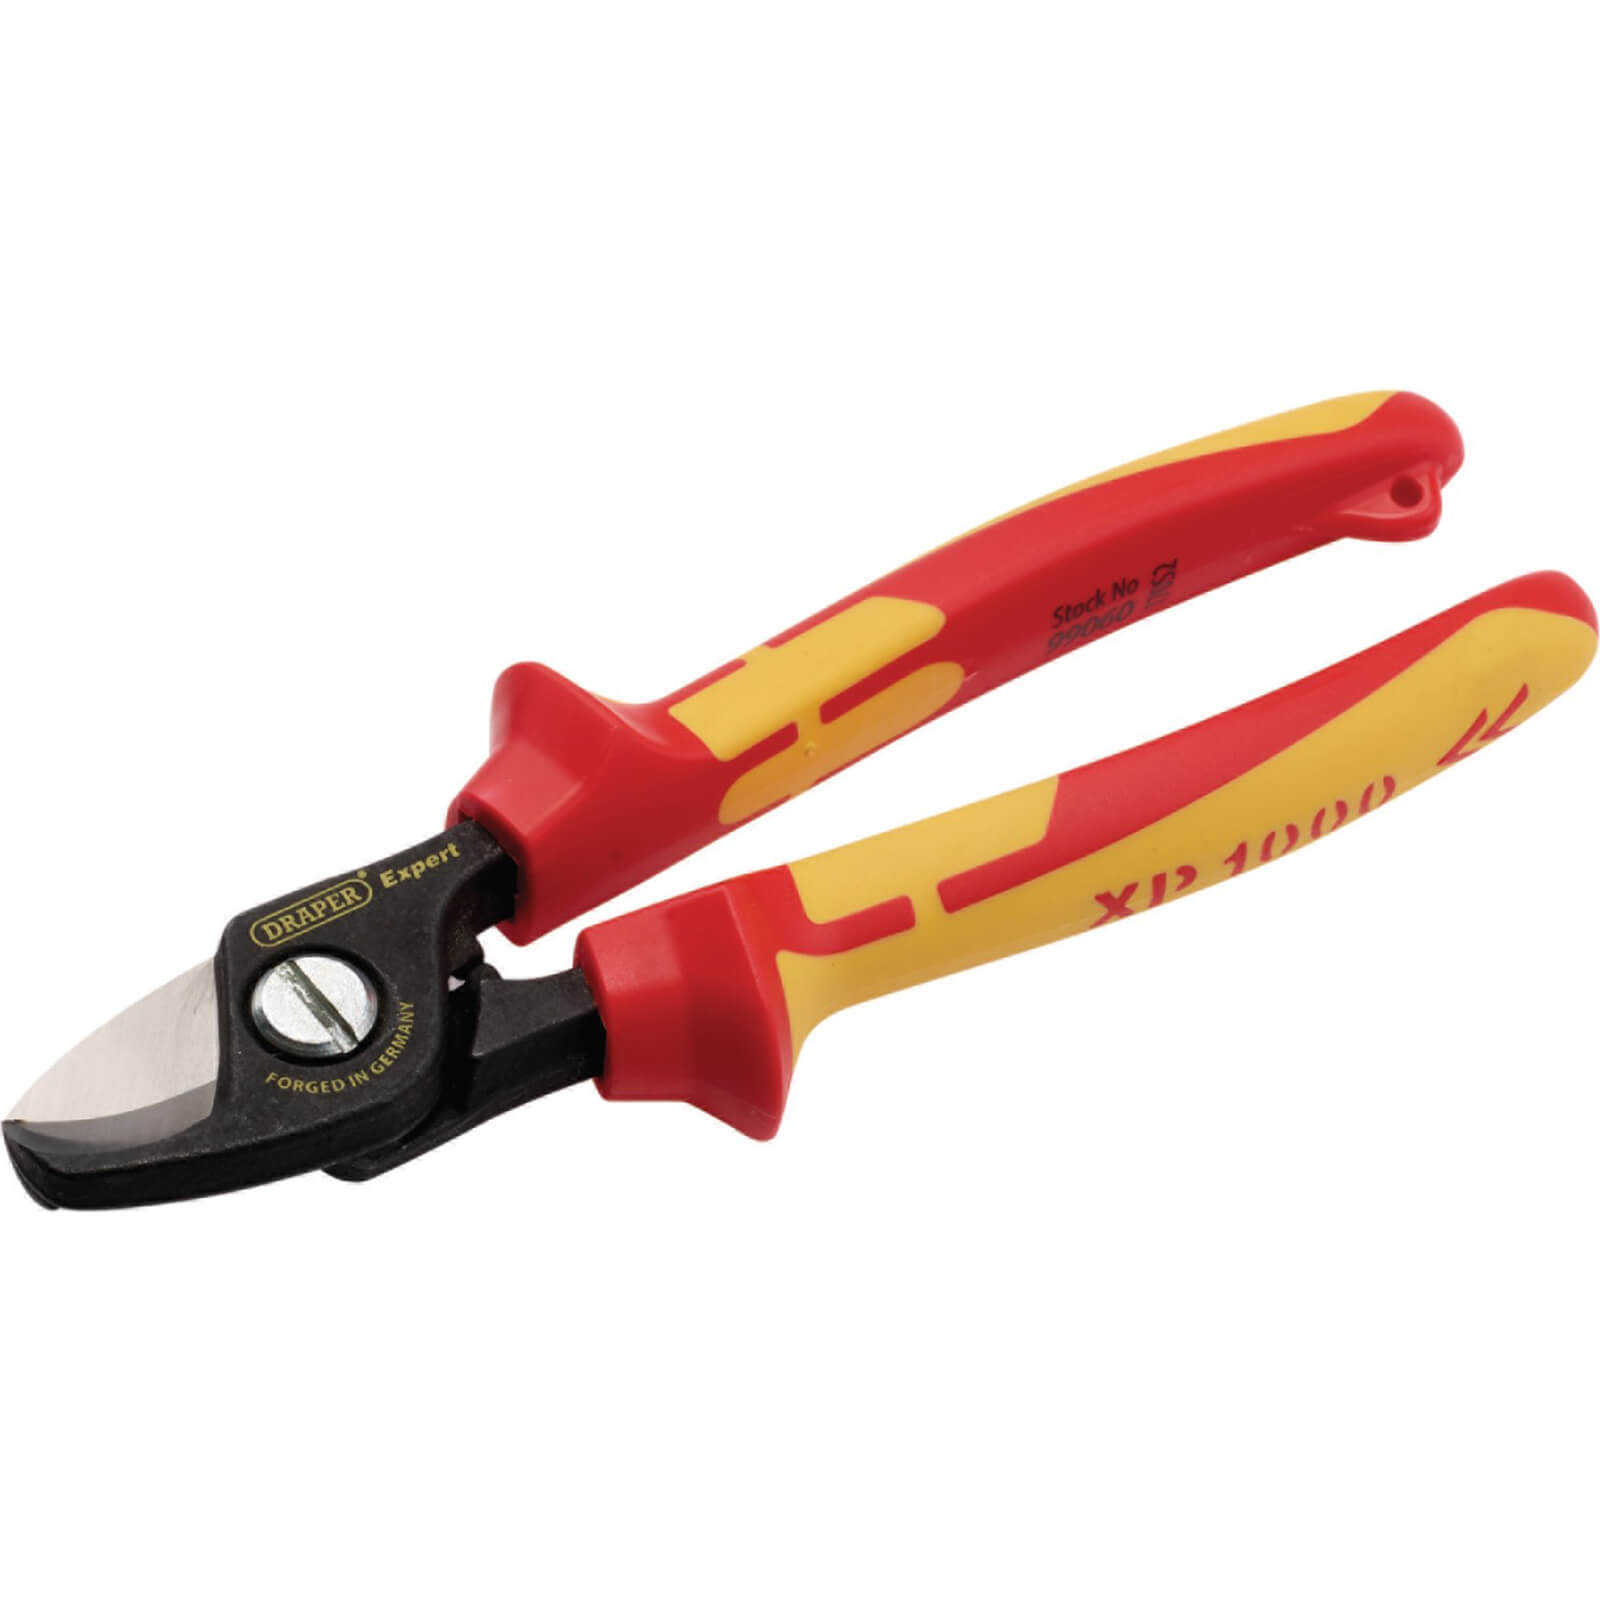 Draper XP1000 VDE Insulated Tethered Cable Shears 170mm